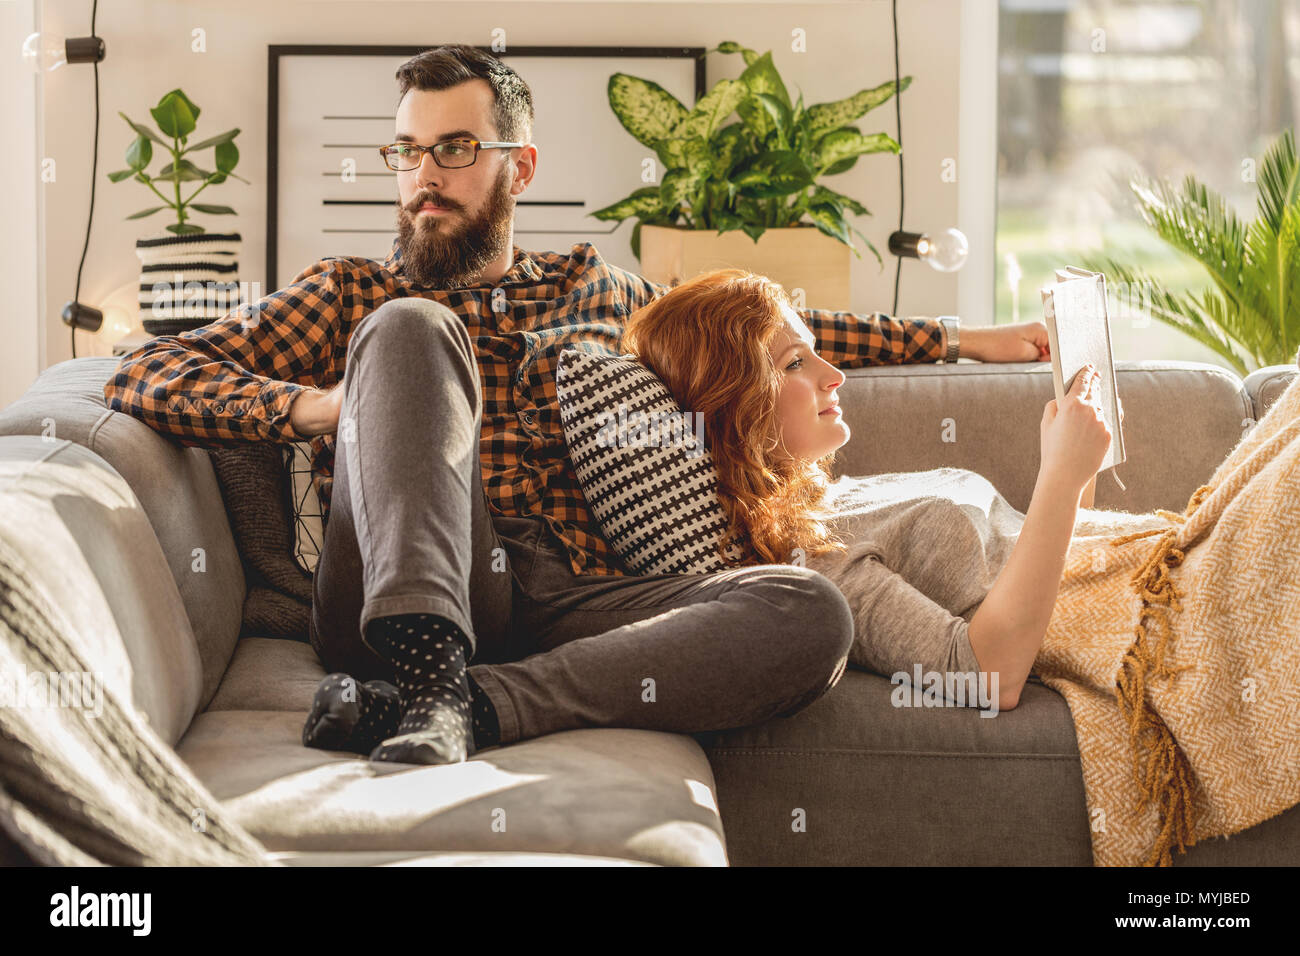 Young marriage relaxing in their free time in scandinavian style living room with modern lighting Stock Photo